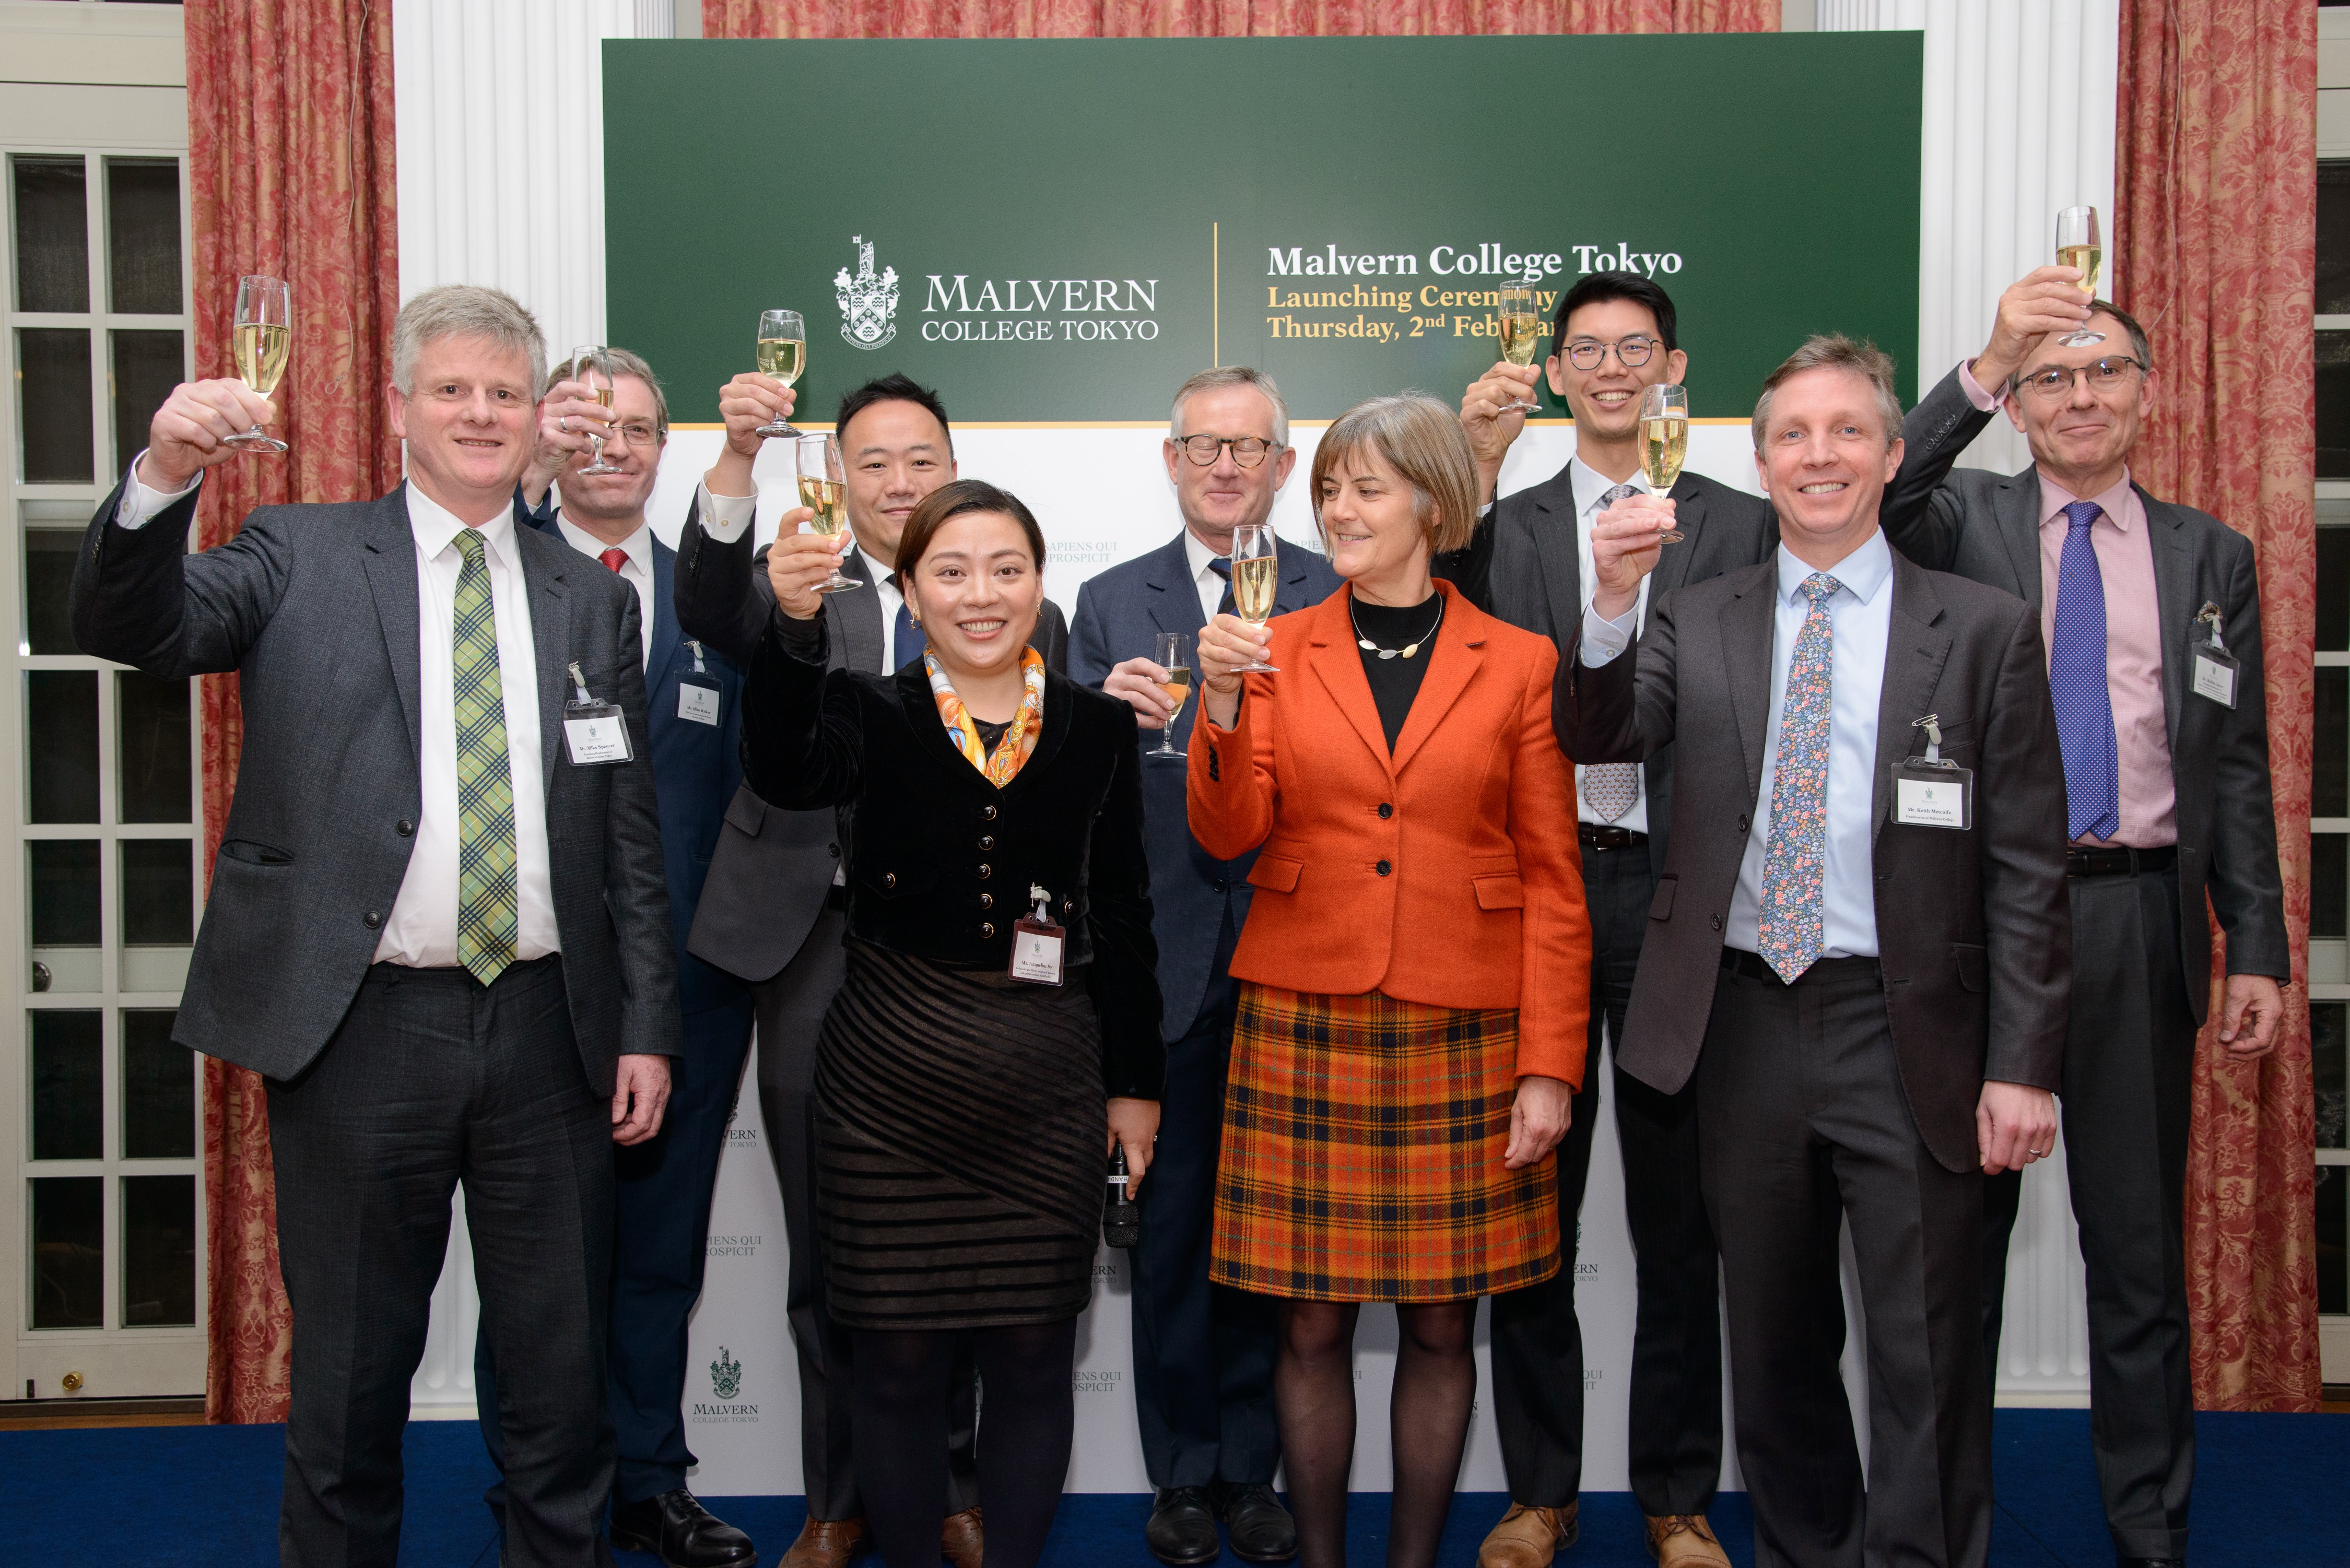 Officiating guests raising a toast and extending their blessings to Malvern College Tokyo Front row from the left - Mr Mike Spencer, Founding Headmaster of Malvern College Tokyo, Ms Jacqueline So, Co-founder and Chief Executive of Malvern College International, Asia Pacific, Ms Julia Longbottom, the British Ambassador to Japan, Mr Keith Metcalfe, Headmaster of Malvern College Back row from the left - Mr Allan Walker, Director of International Schools, Malvern College, Mr Samuel Wu, Co-founding Executive Director of Malvern College Hong Kong, board member of Malvern College Chengdu, Mr Robin Black, Board of Directors, Malvern College Council, Mr Michael Chan, Director of Malvern College Hong Kong, Dr Robin Lister, Founding Headmaster of Malvern College Hong Kong and Regional Executive Advisor of Malvern College International, Asia Pacific